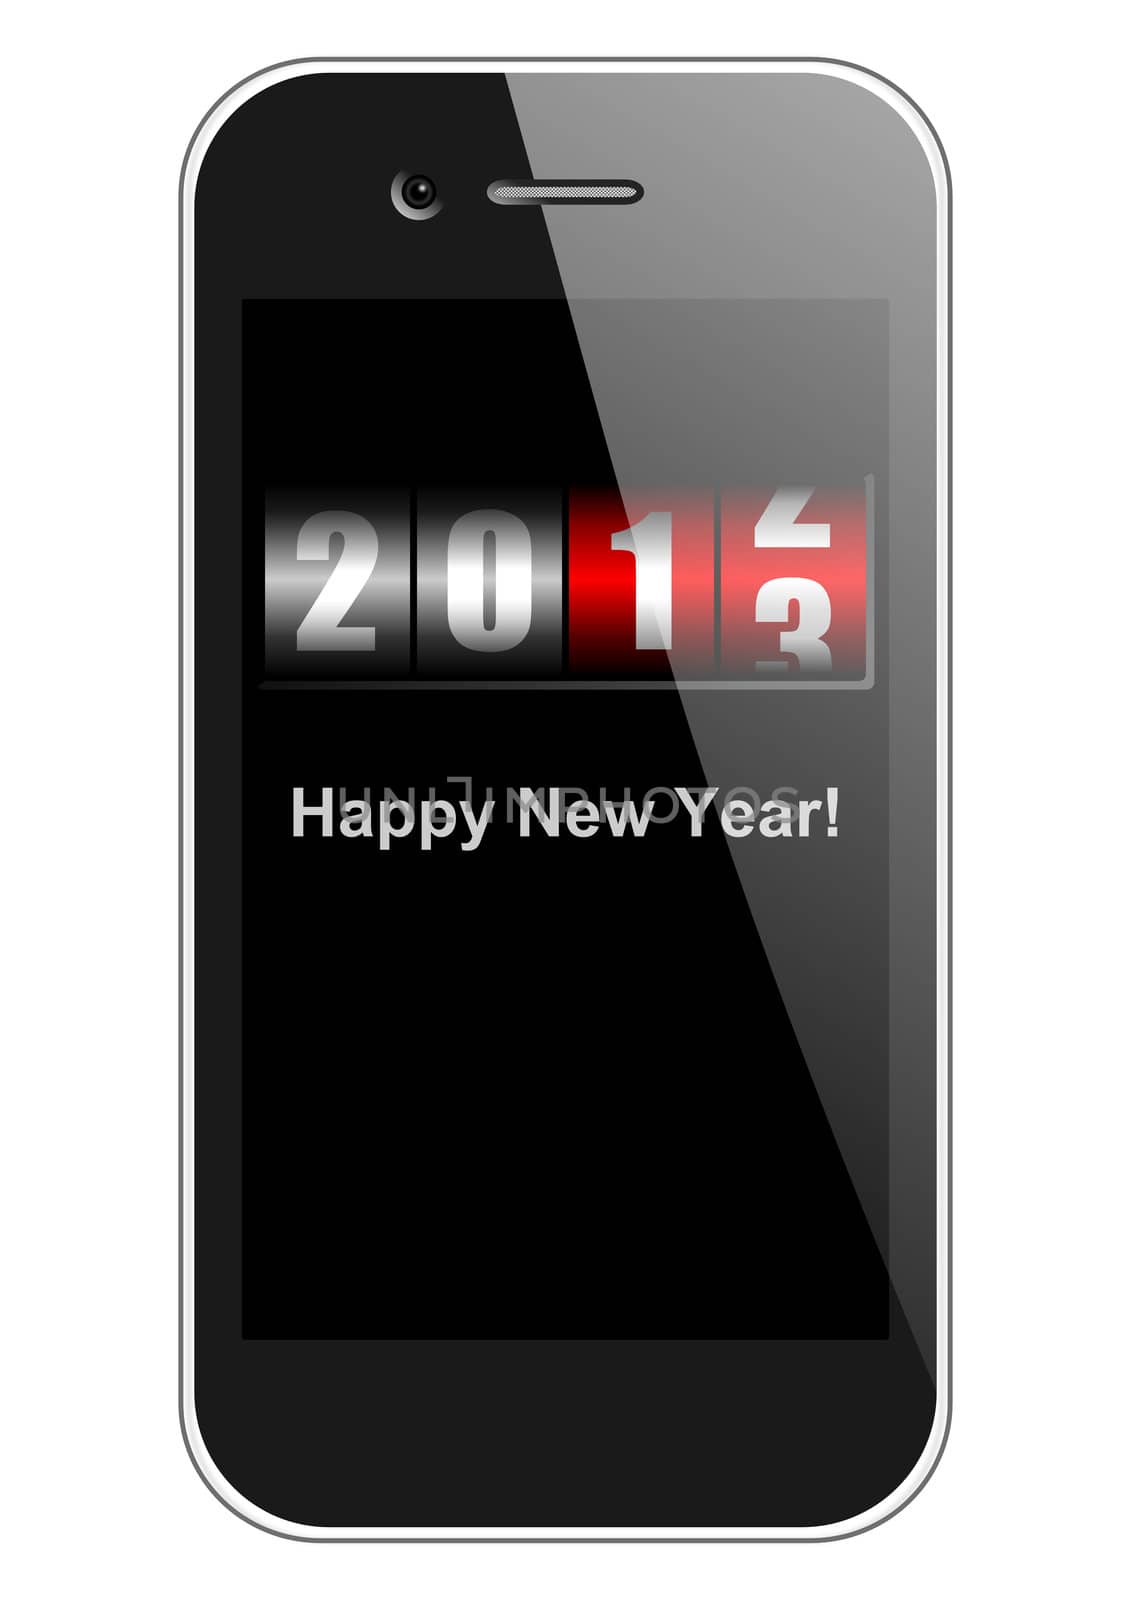 2013 new years illustration with mobile phone and counter